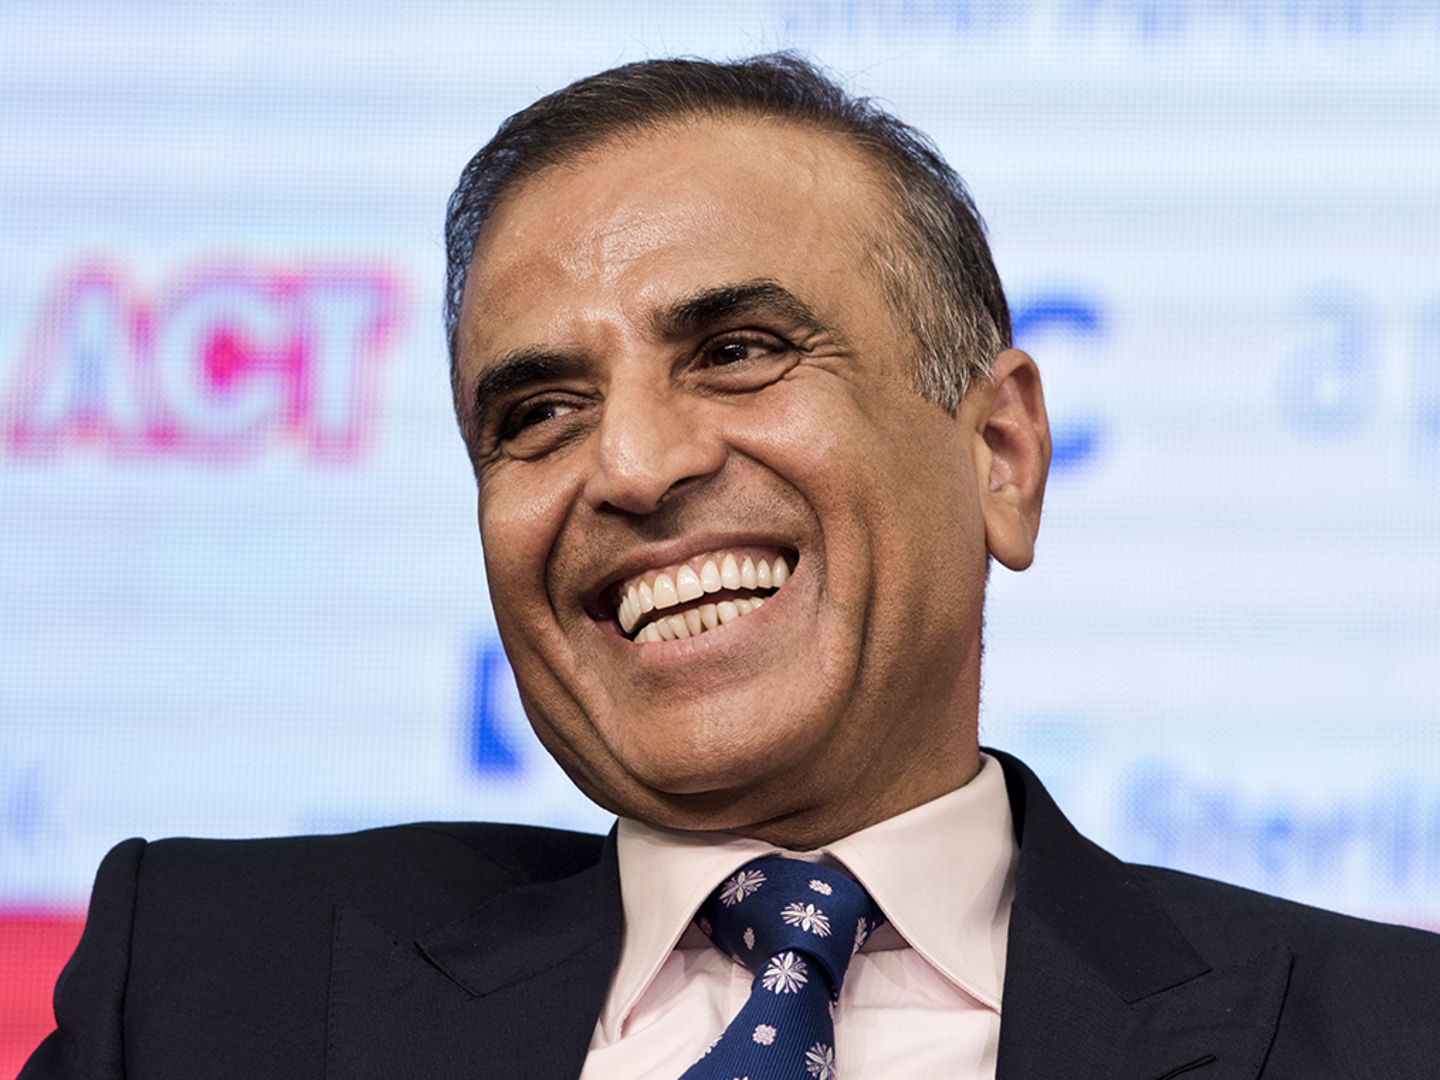 Beyond Airtel’s impressive Q2 show: strengths pay off, now to maintain the momentum